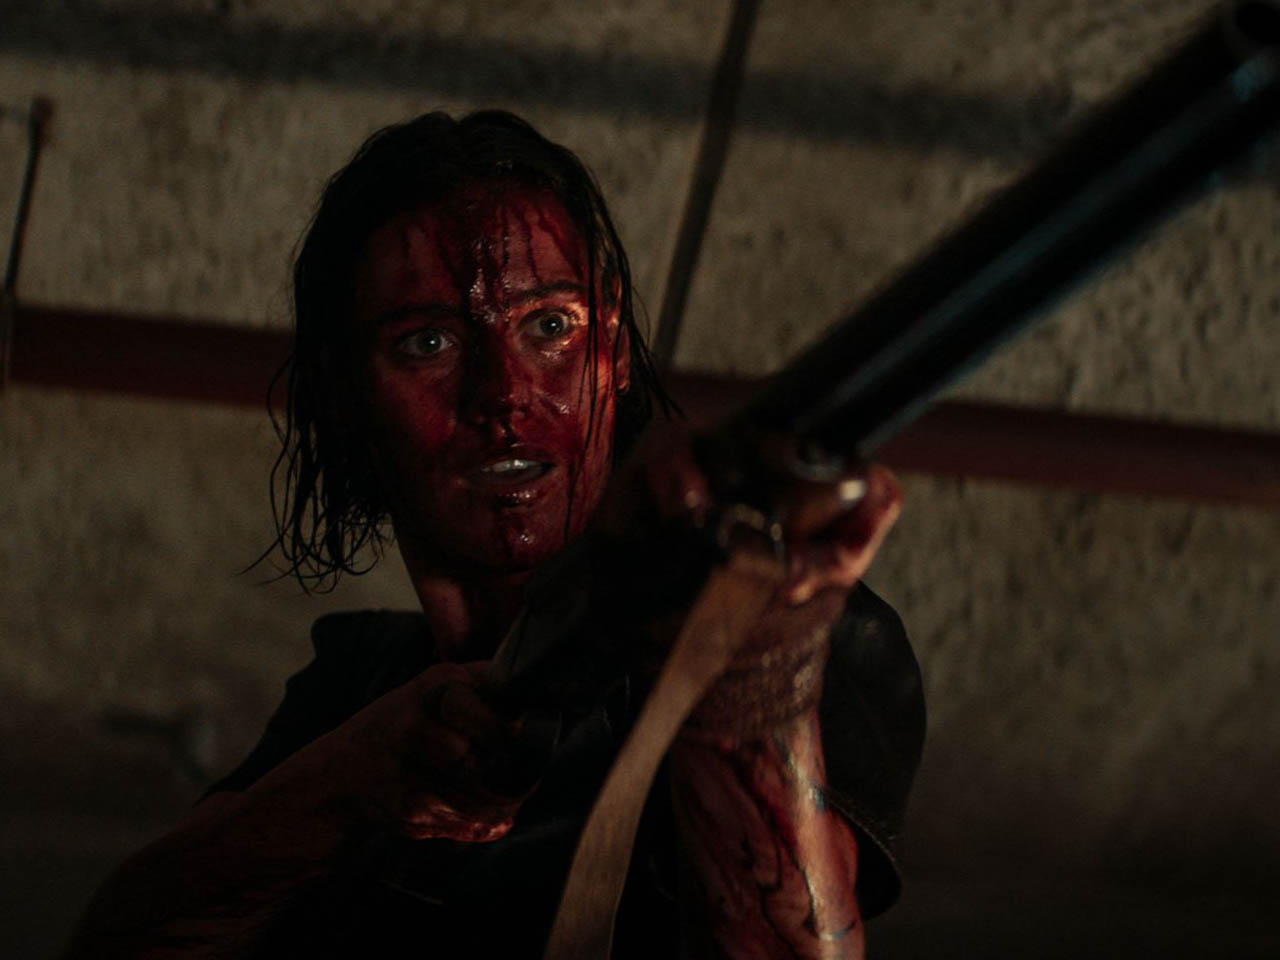 Watch Trailer For 'Evil Dead Rise' In Theaters Friday, April 21st 